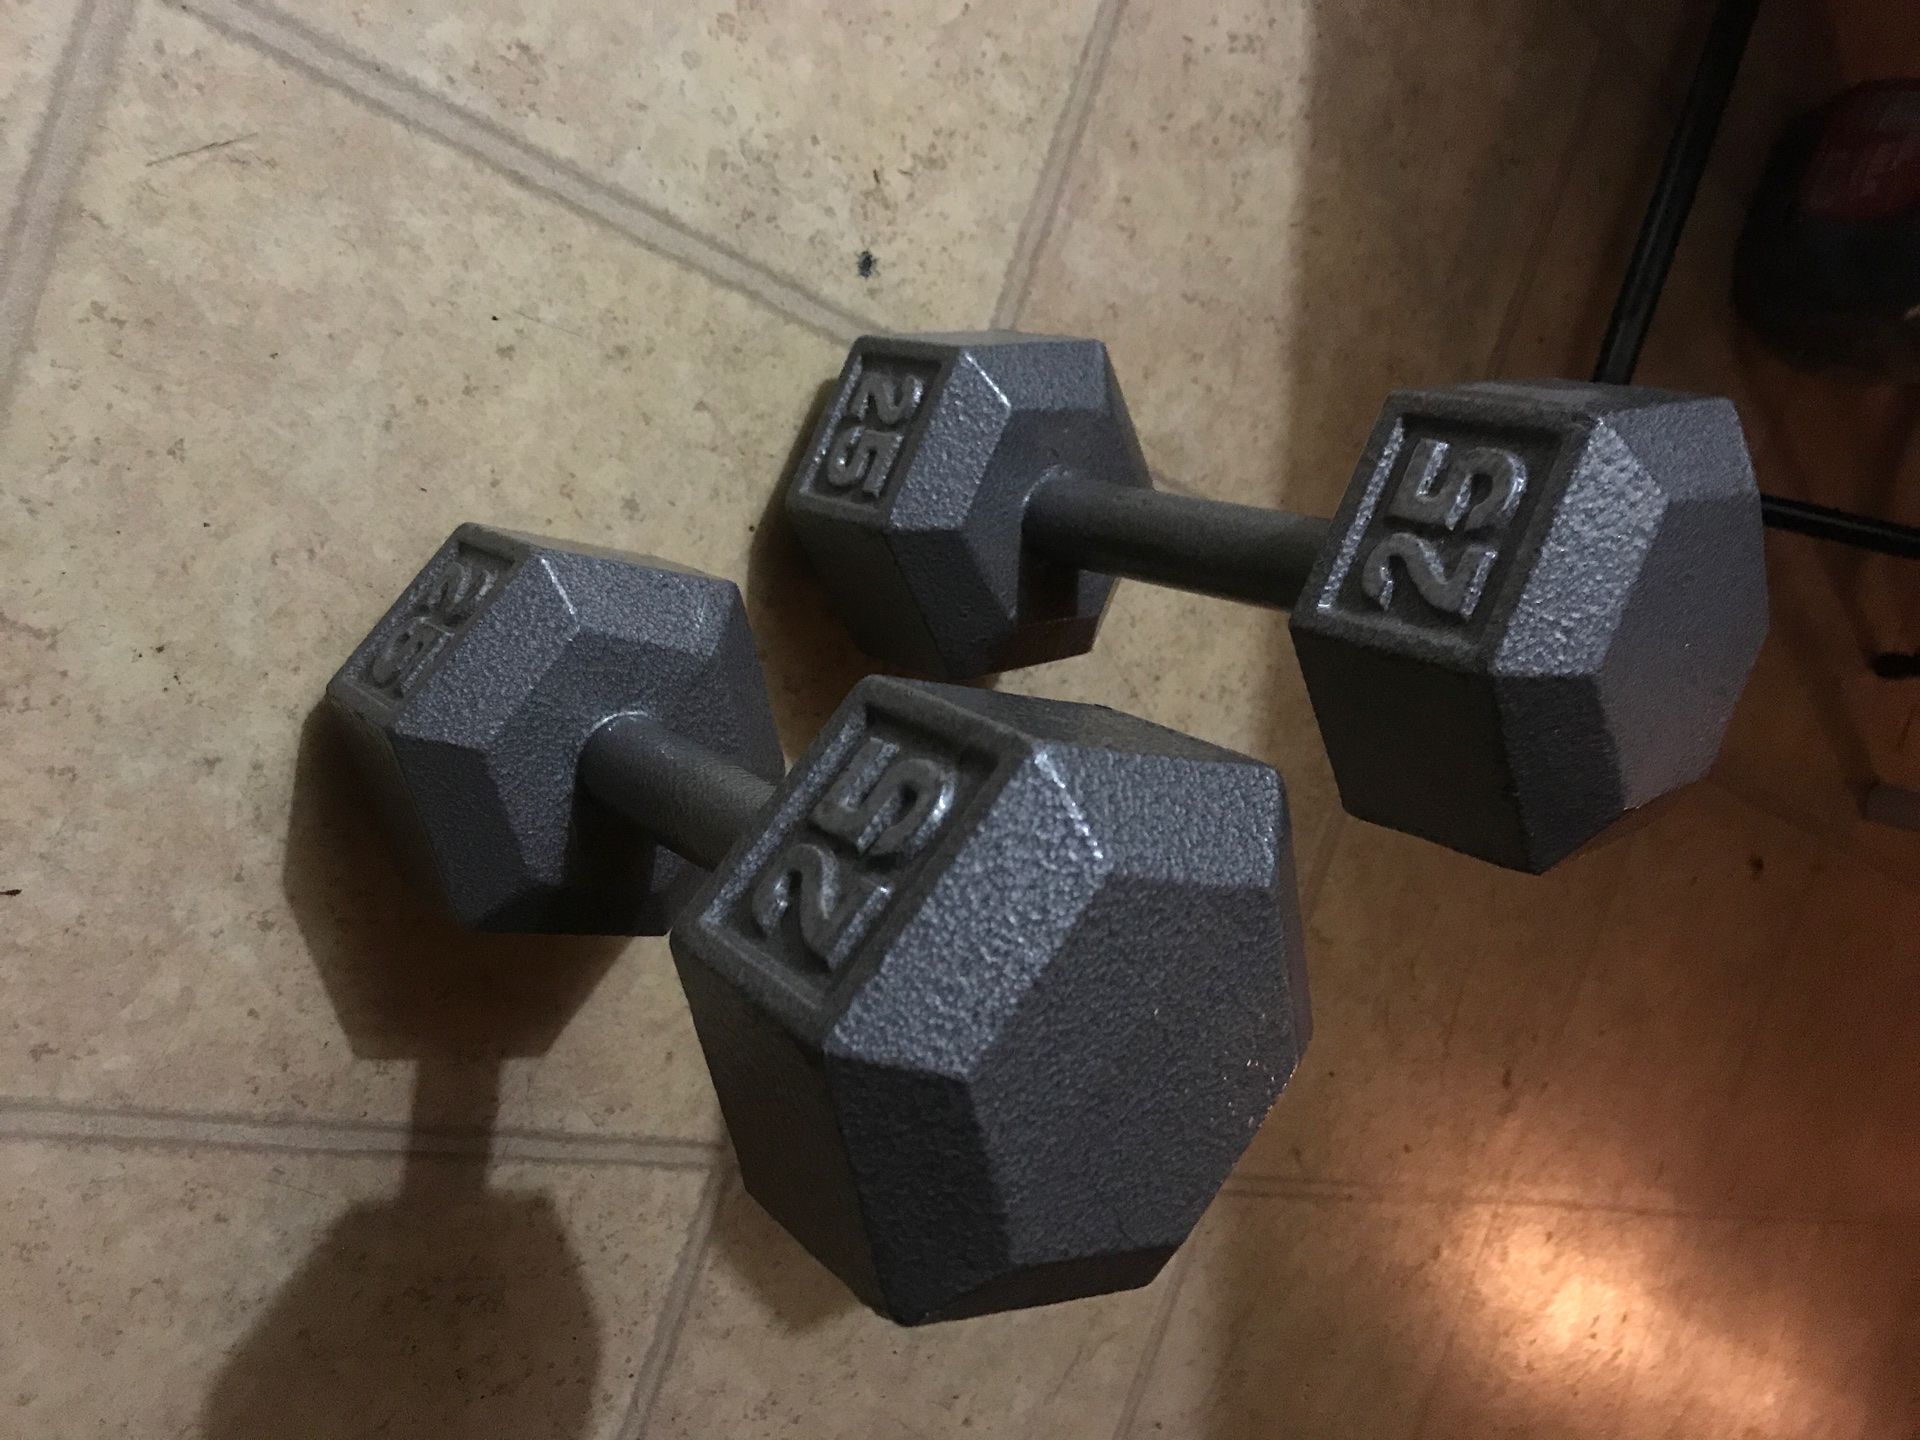 25 lb weights